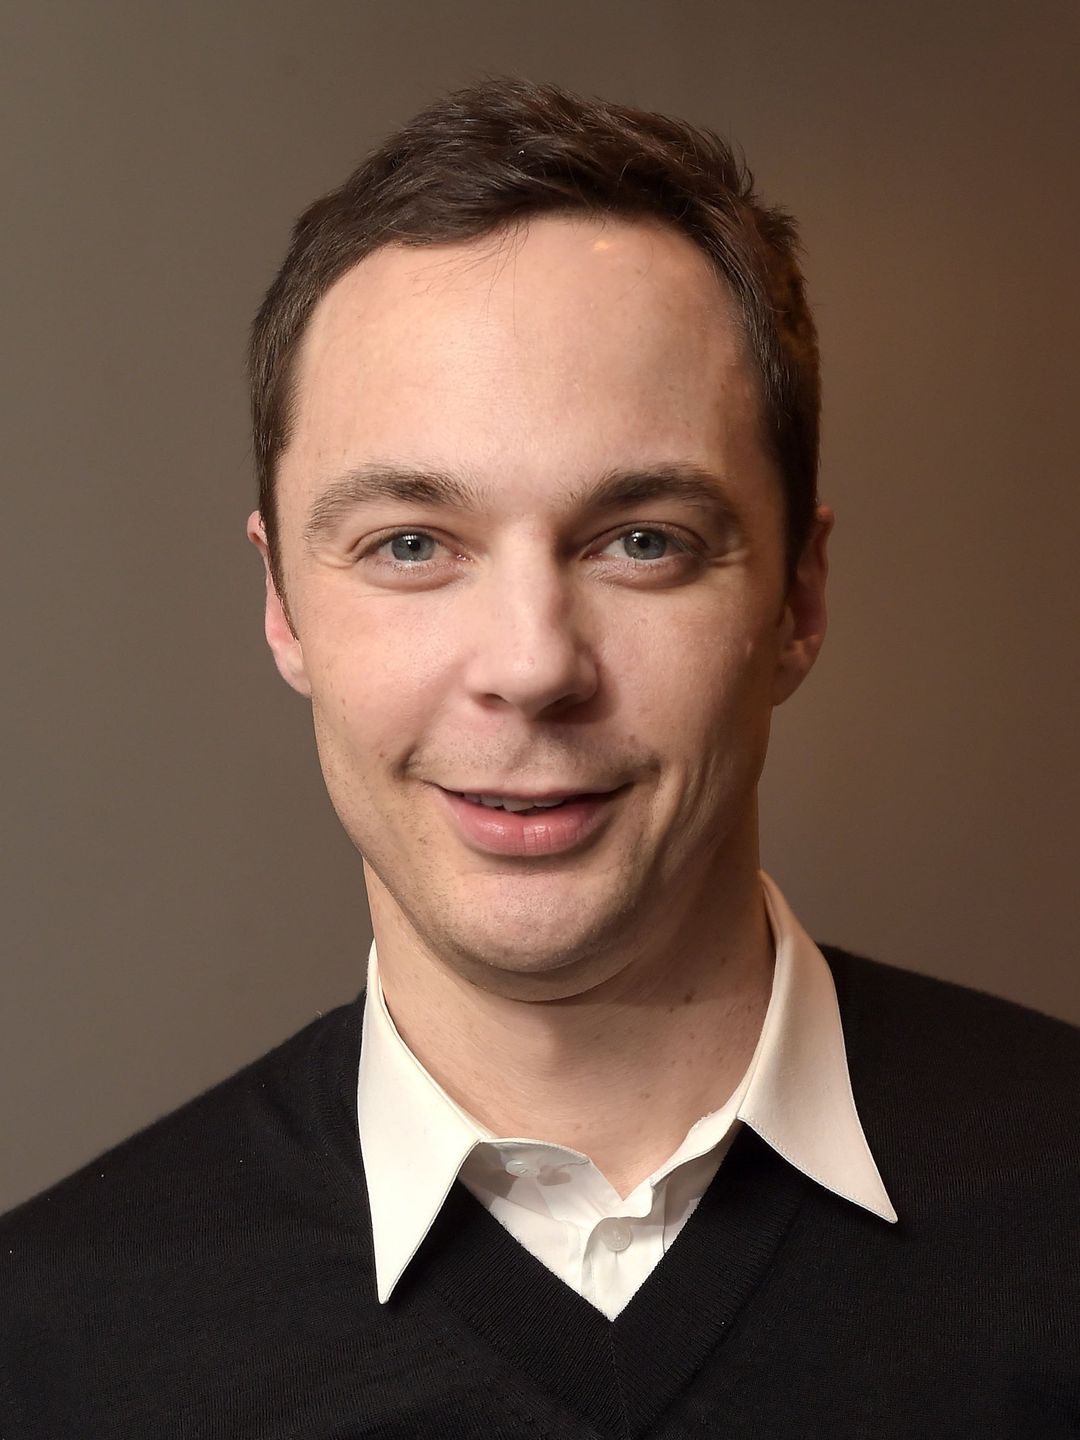 Jim Parsons in his youth